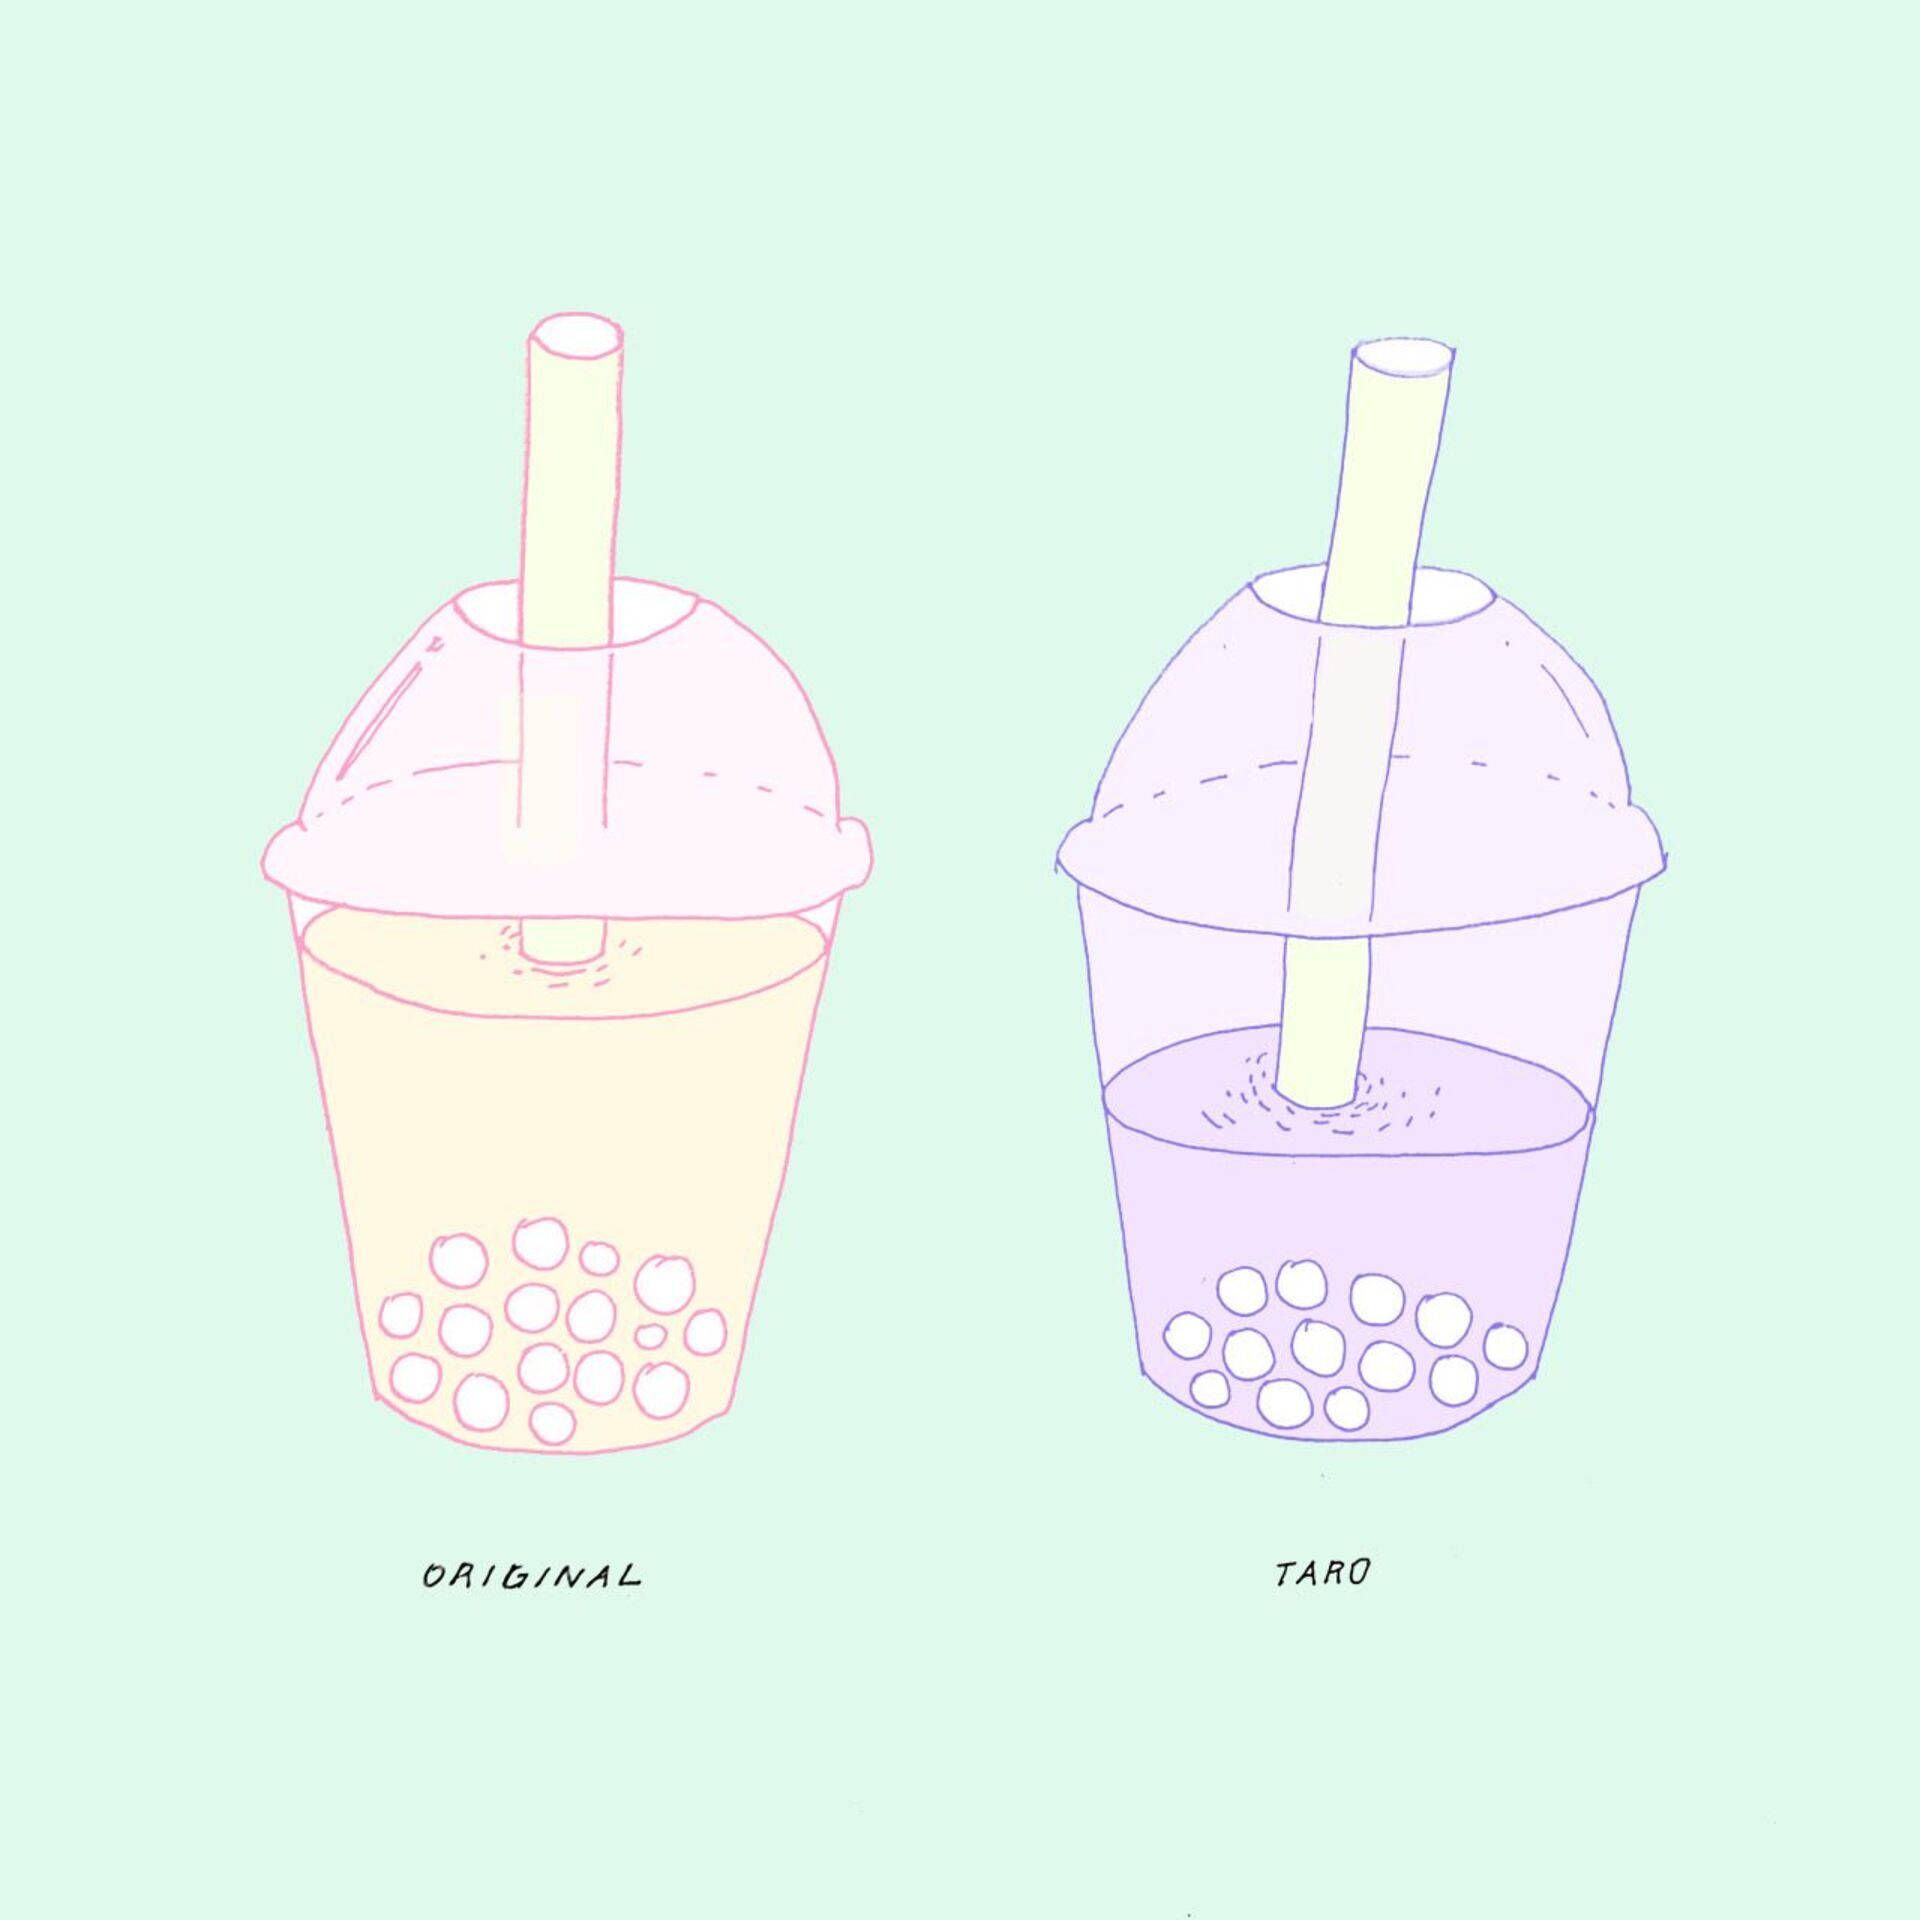 Two bubble tea cups, one original and one taro, on a green background - Boba